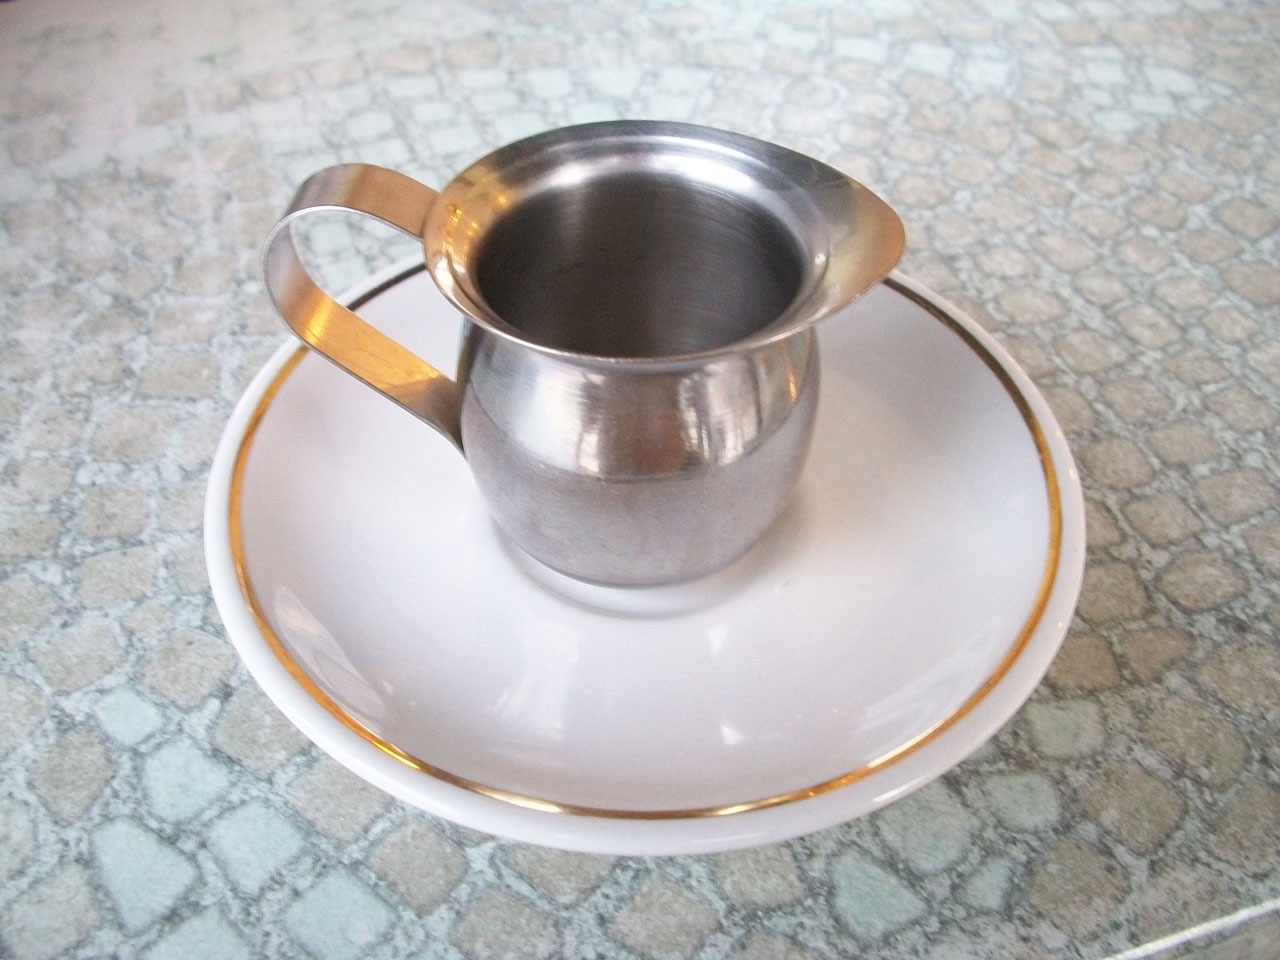 stainless steel teacup and white ceramic round saucer